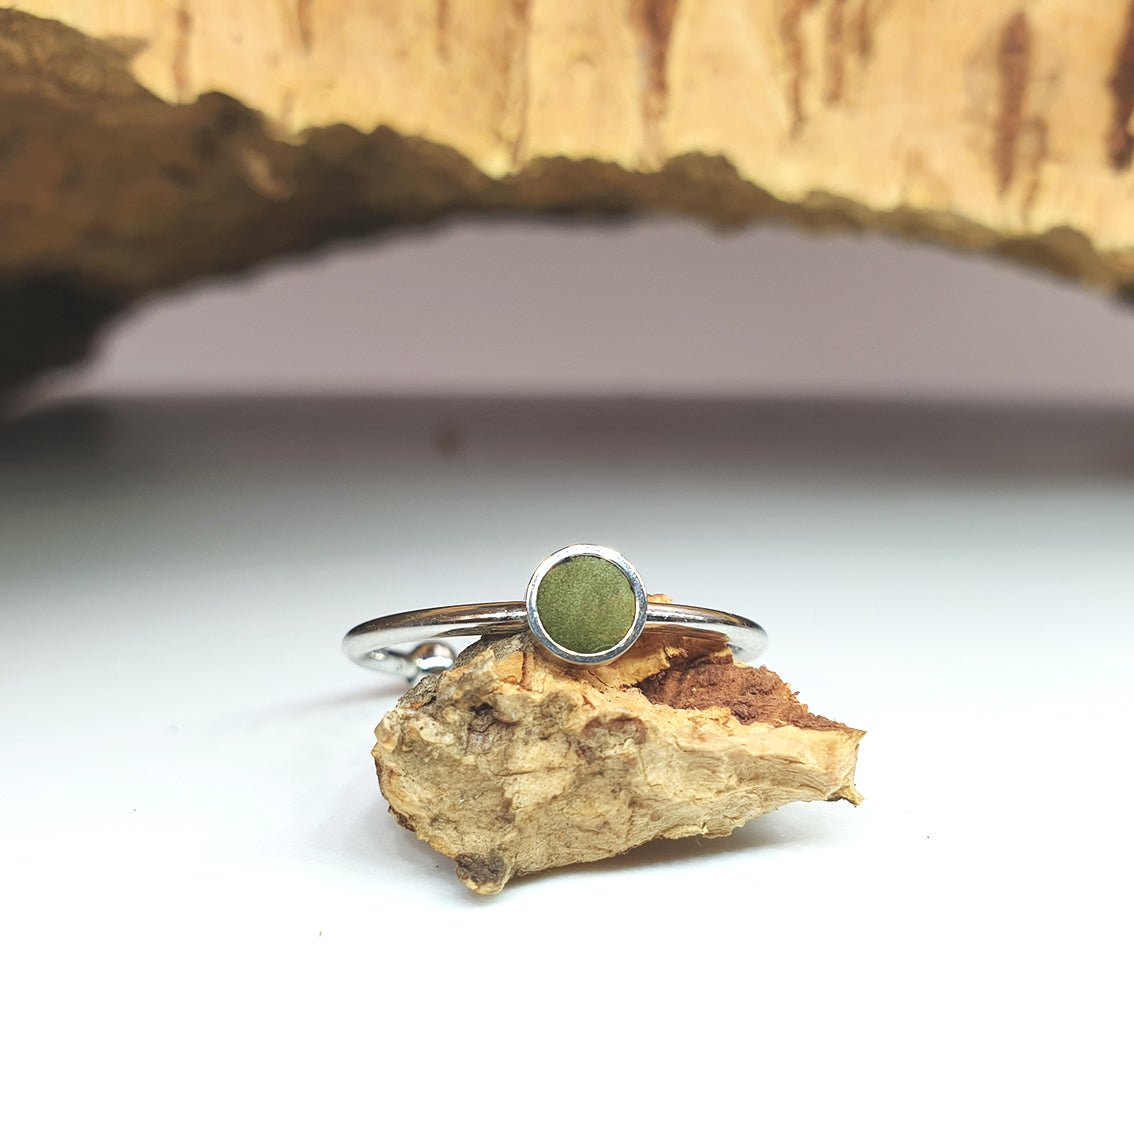 Fabrikk 1 Planet Stacking Ring | Small | Army Green | Vegan Leather